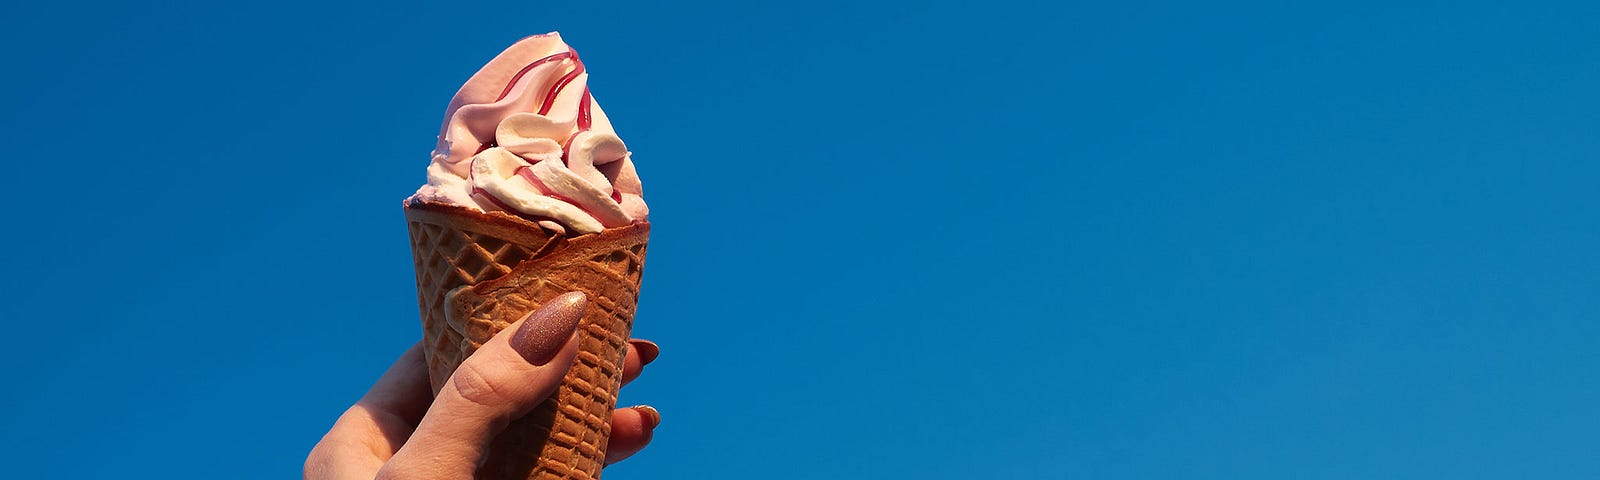 Hand holding up an ice cream cone. The background is a brilliant blue sky.